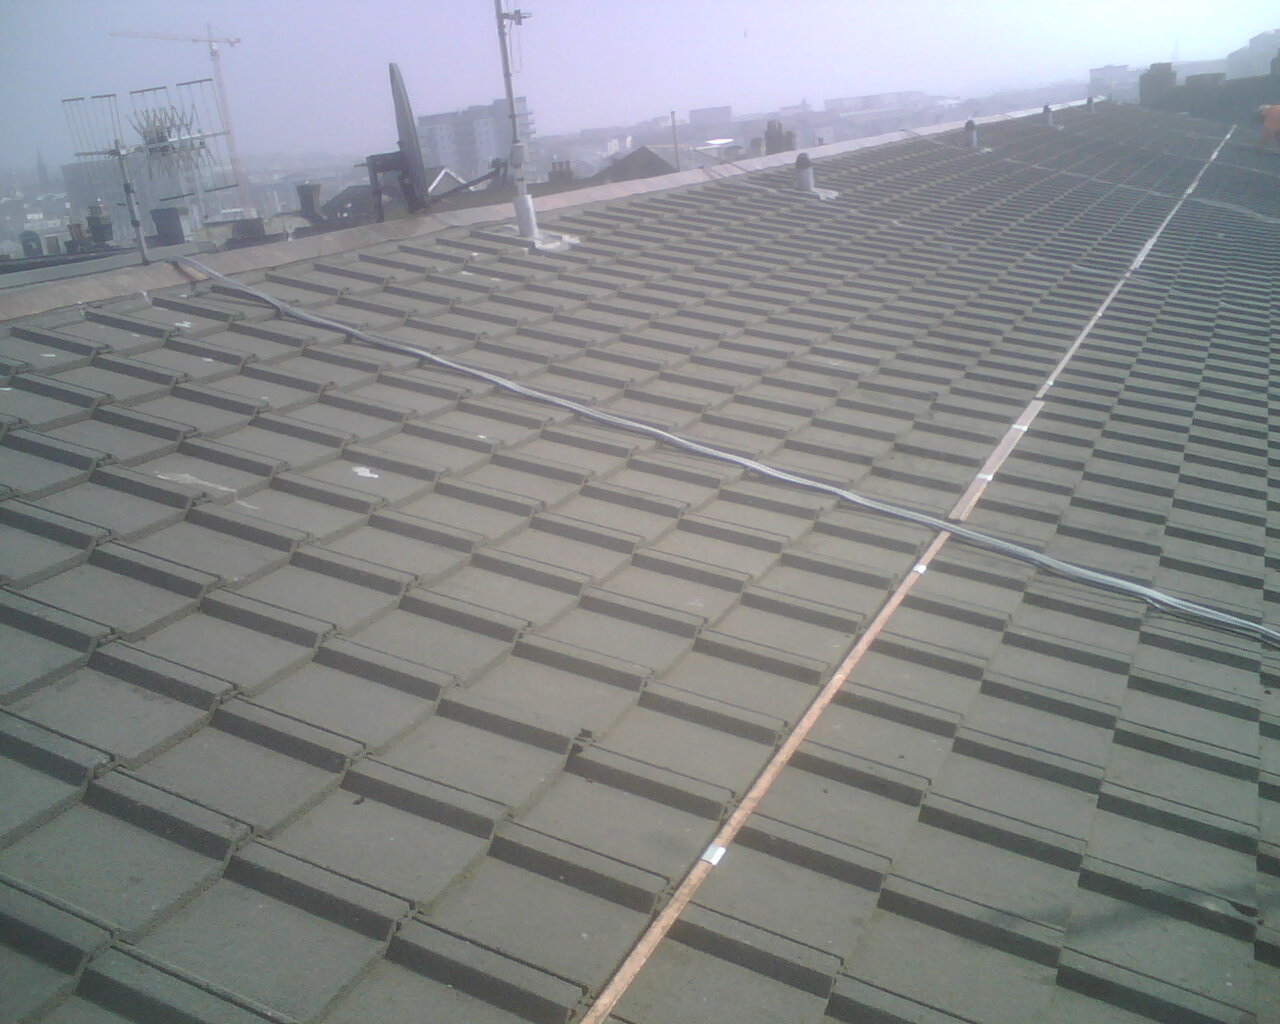 Image of the actual installation of a copper bar for moss control on a roof.